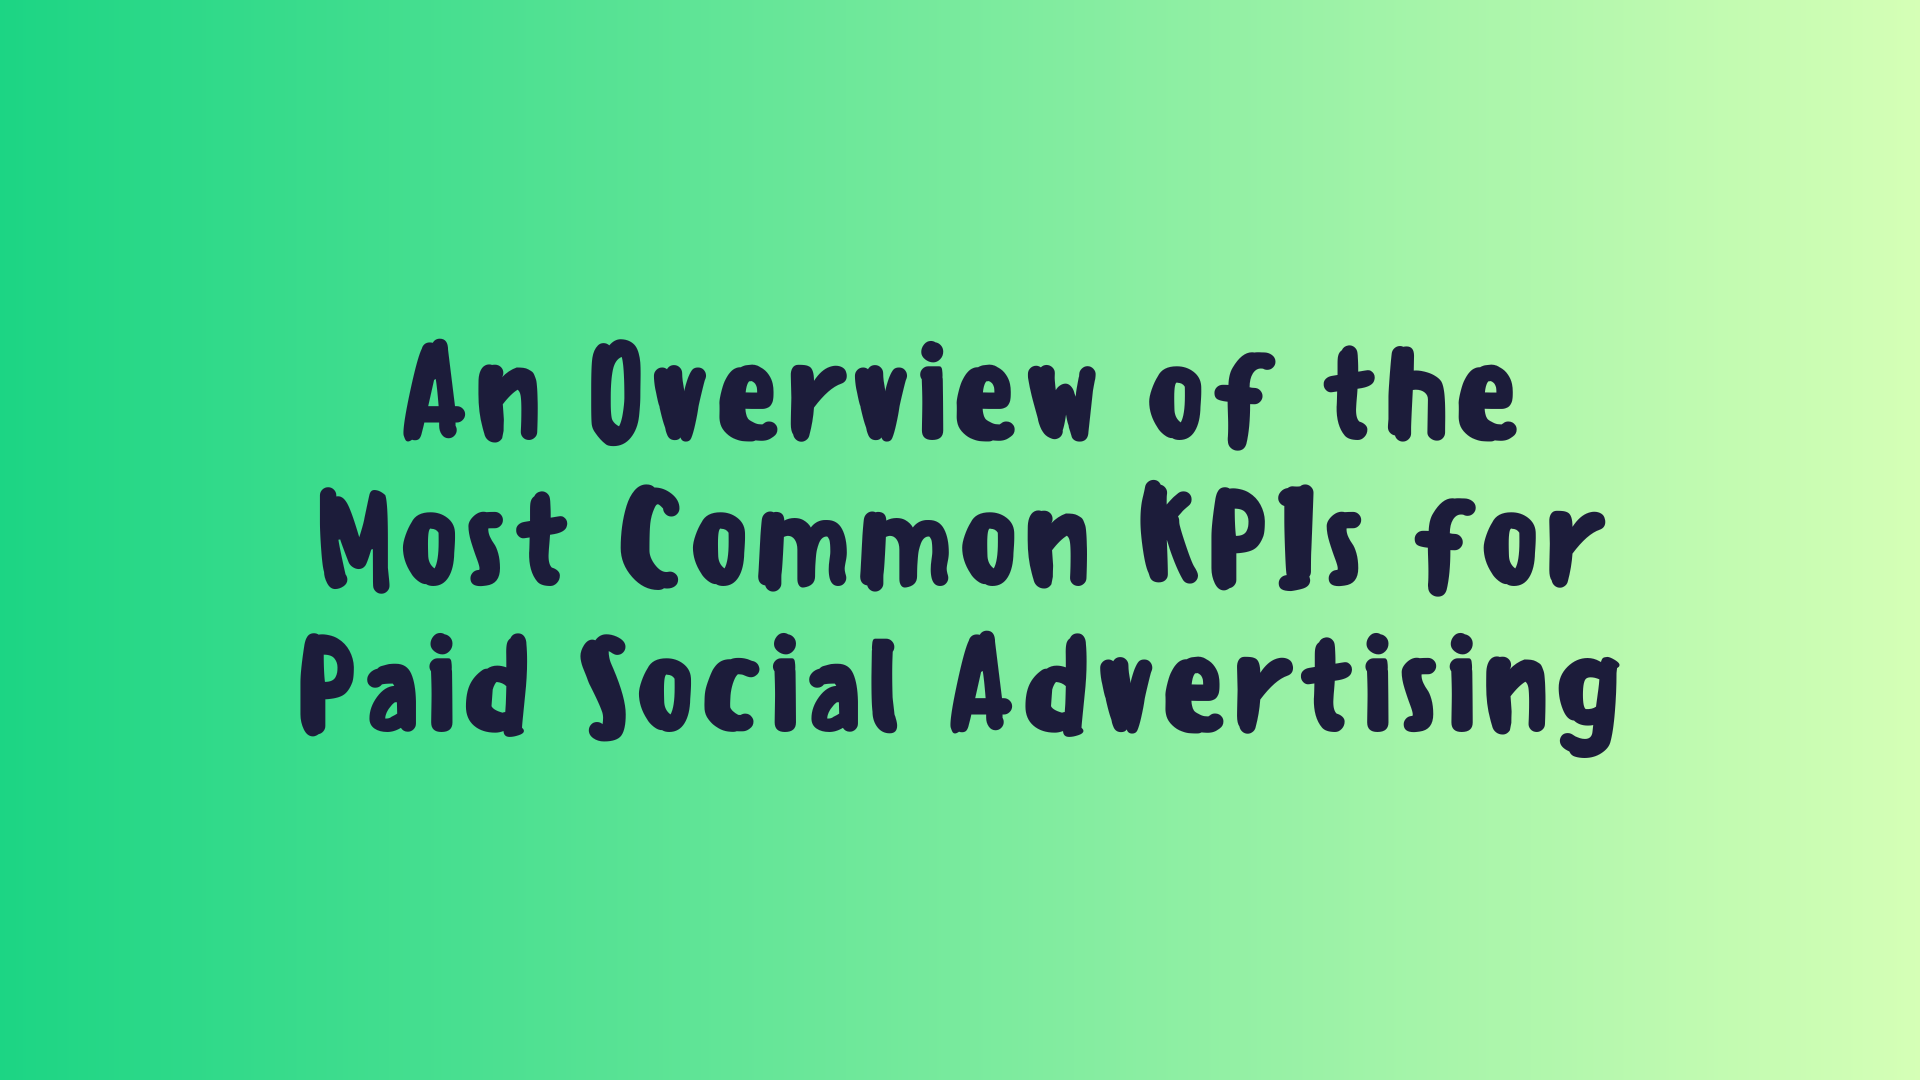 An Overview of the Most Common KPIs for Paid Social Advertising